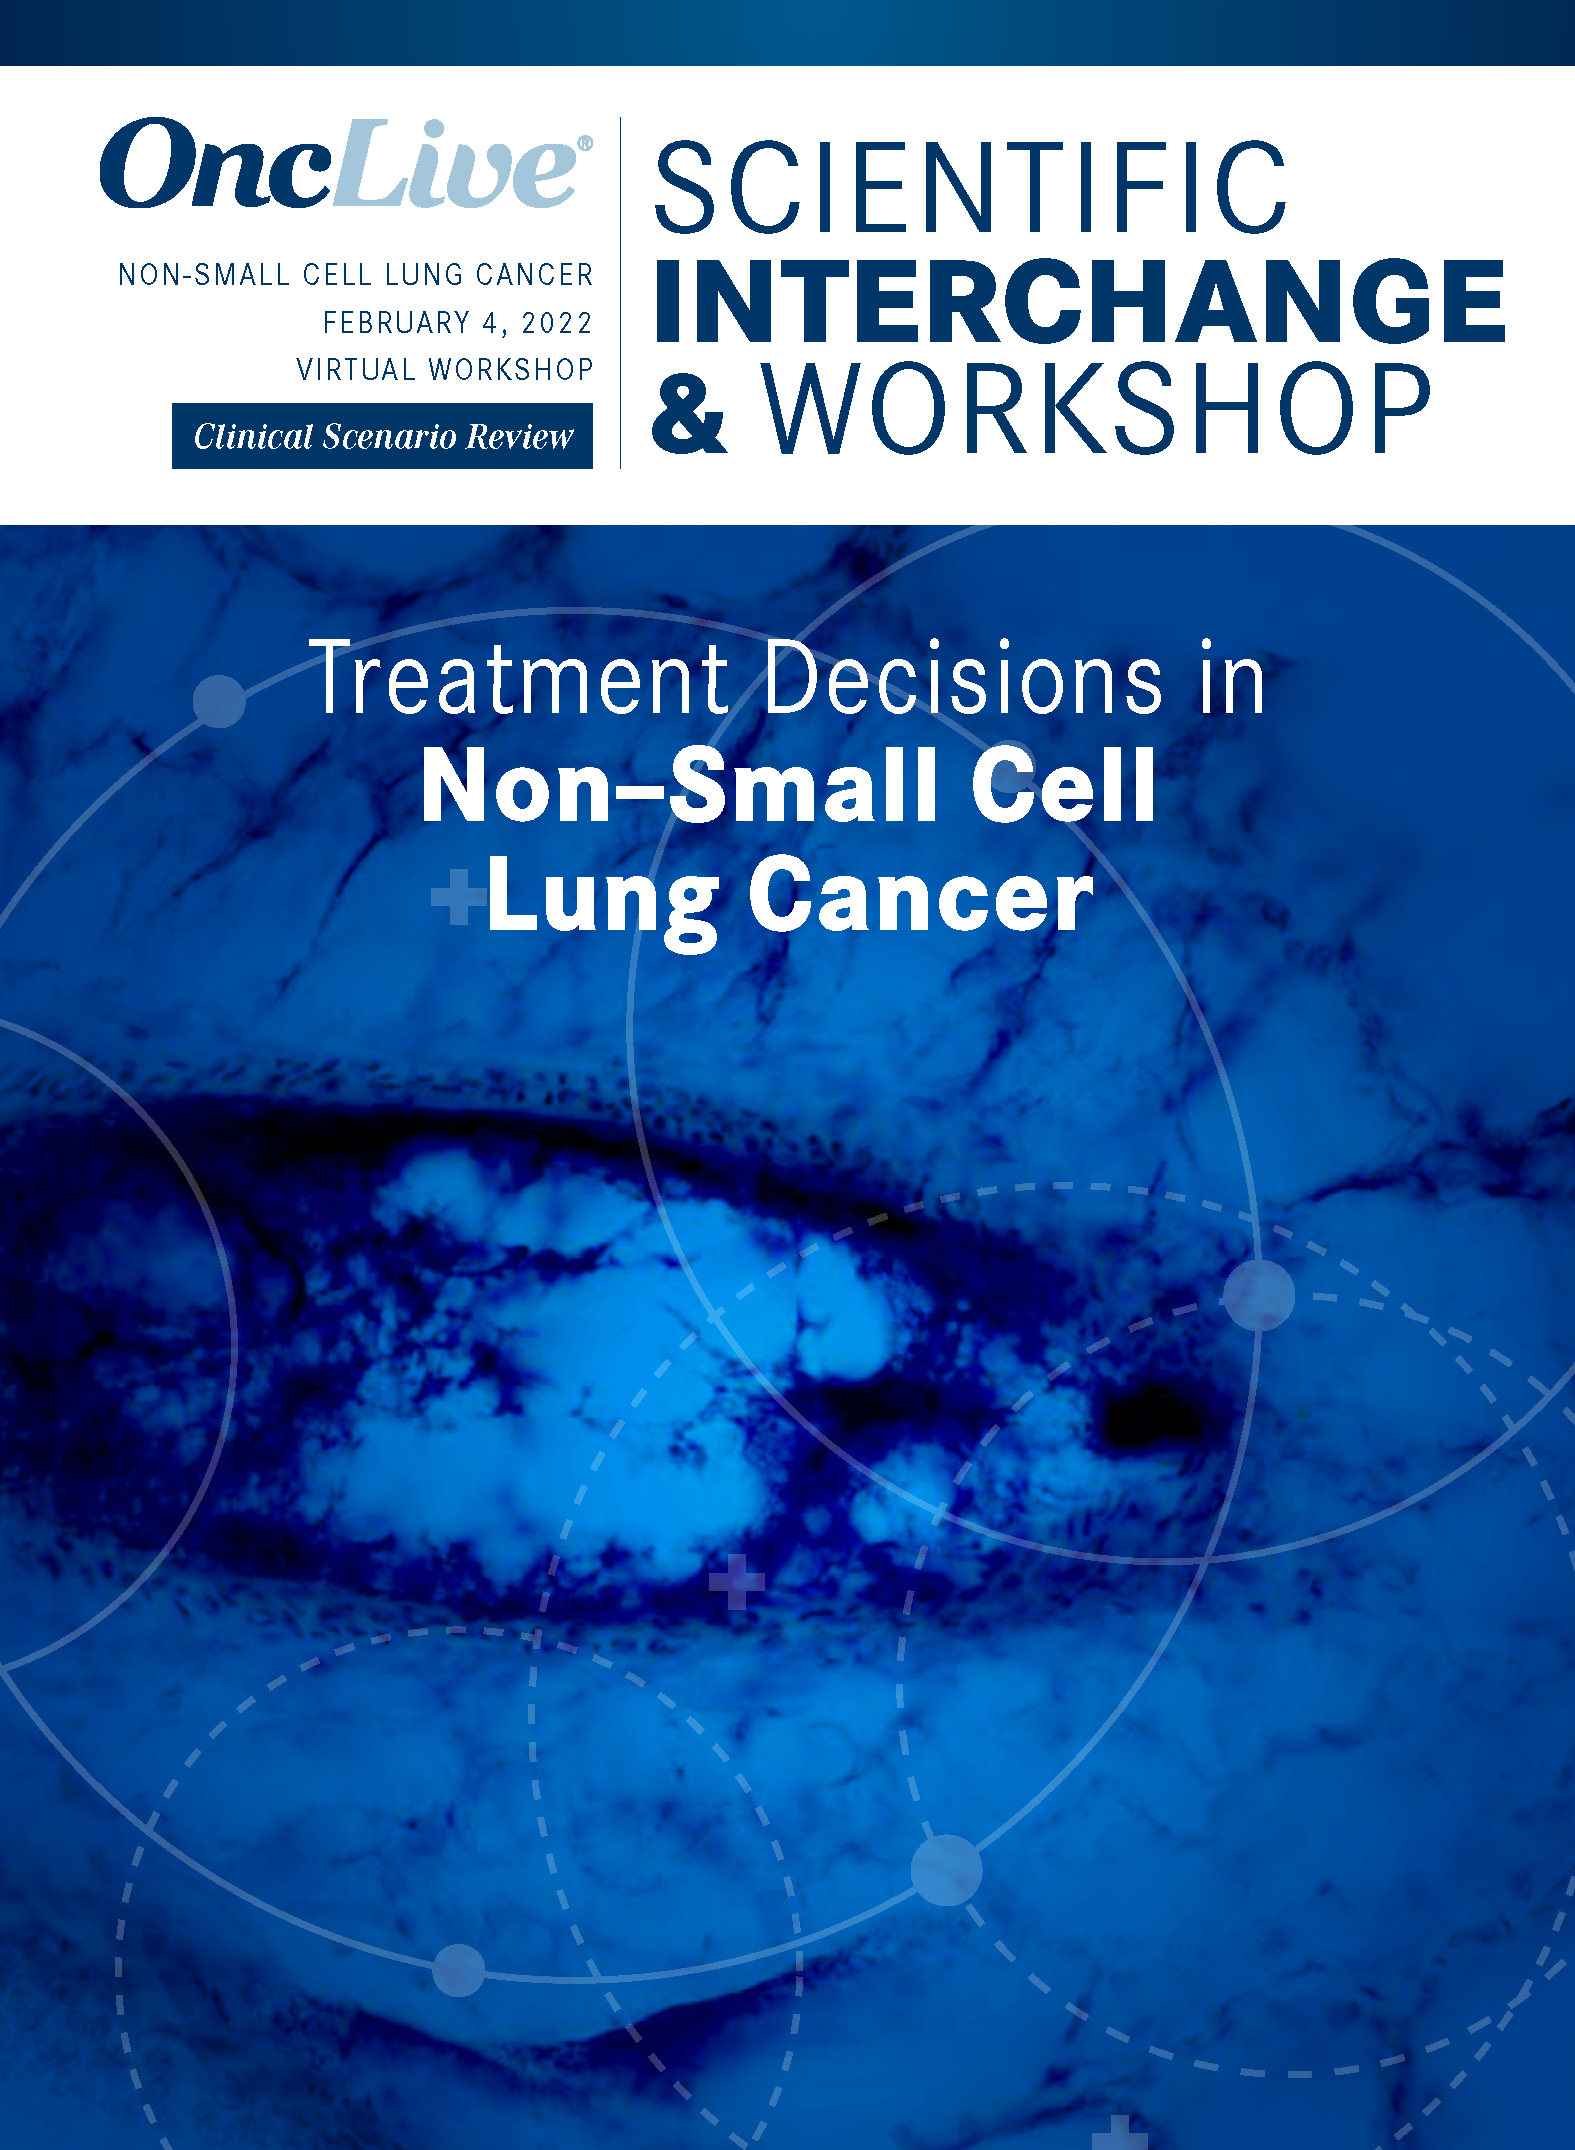 Treatment Decisions in Non-Small Cell Lung Cancer